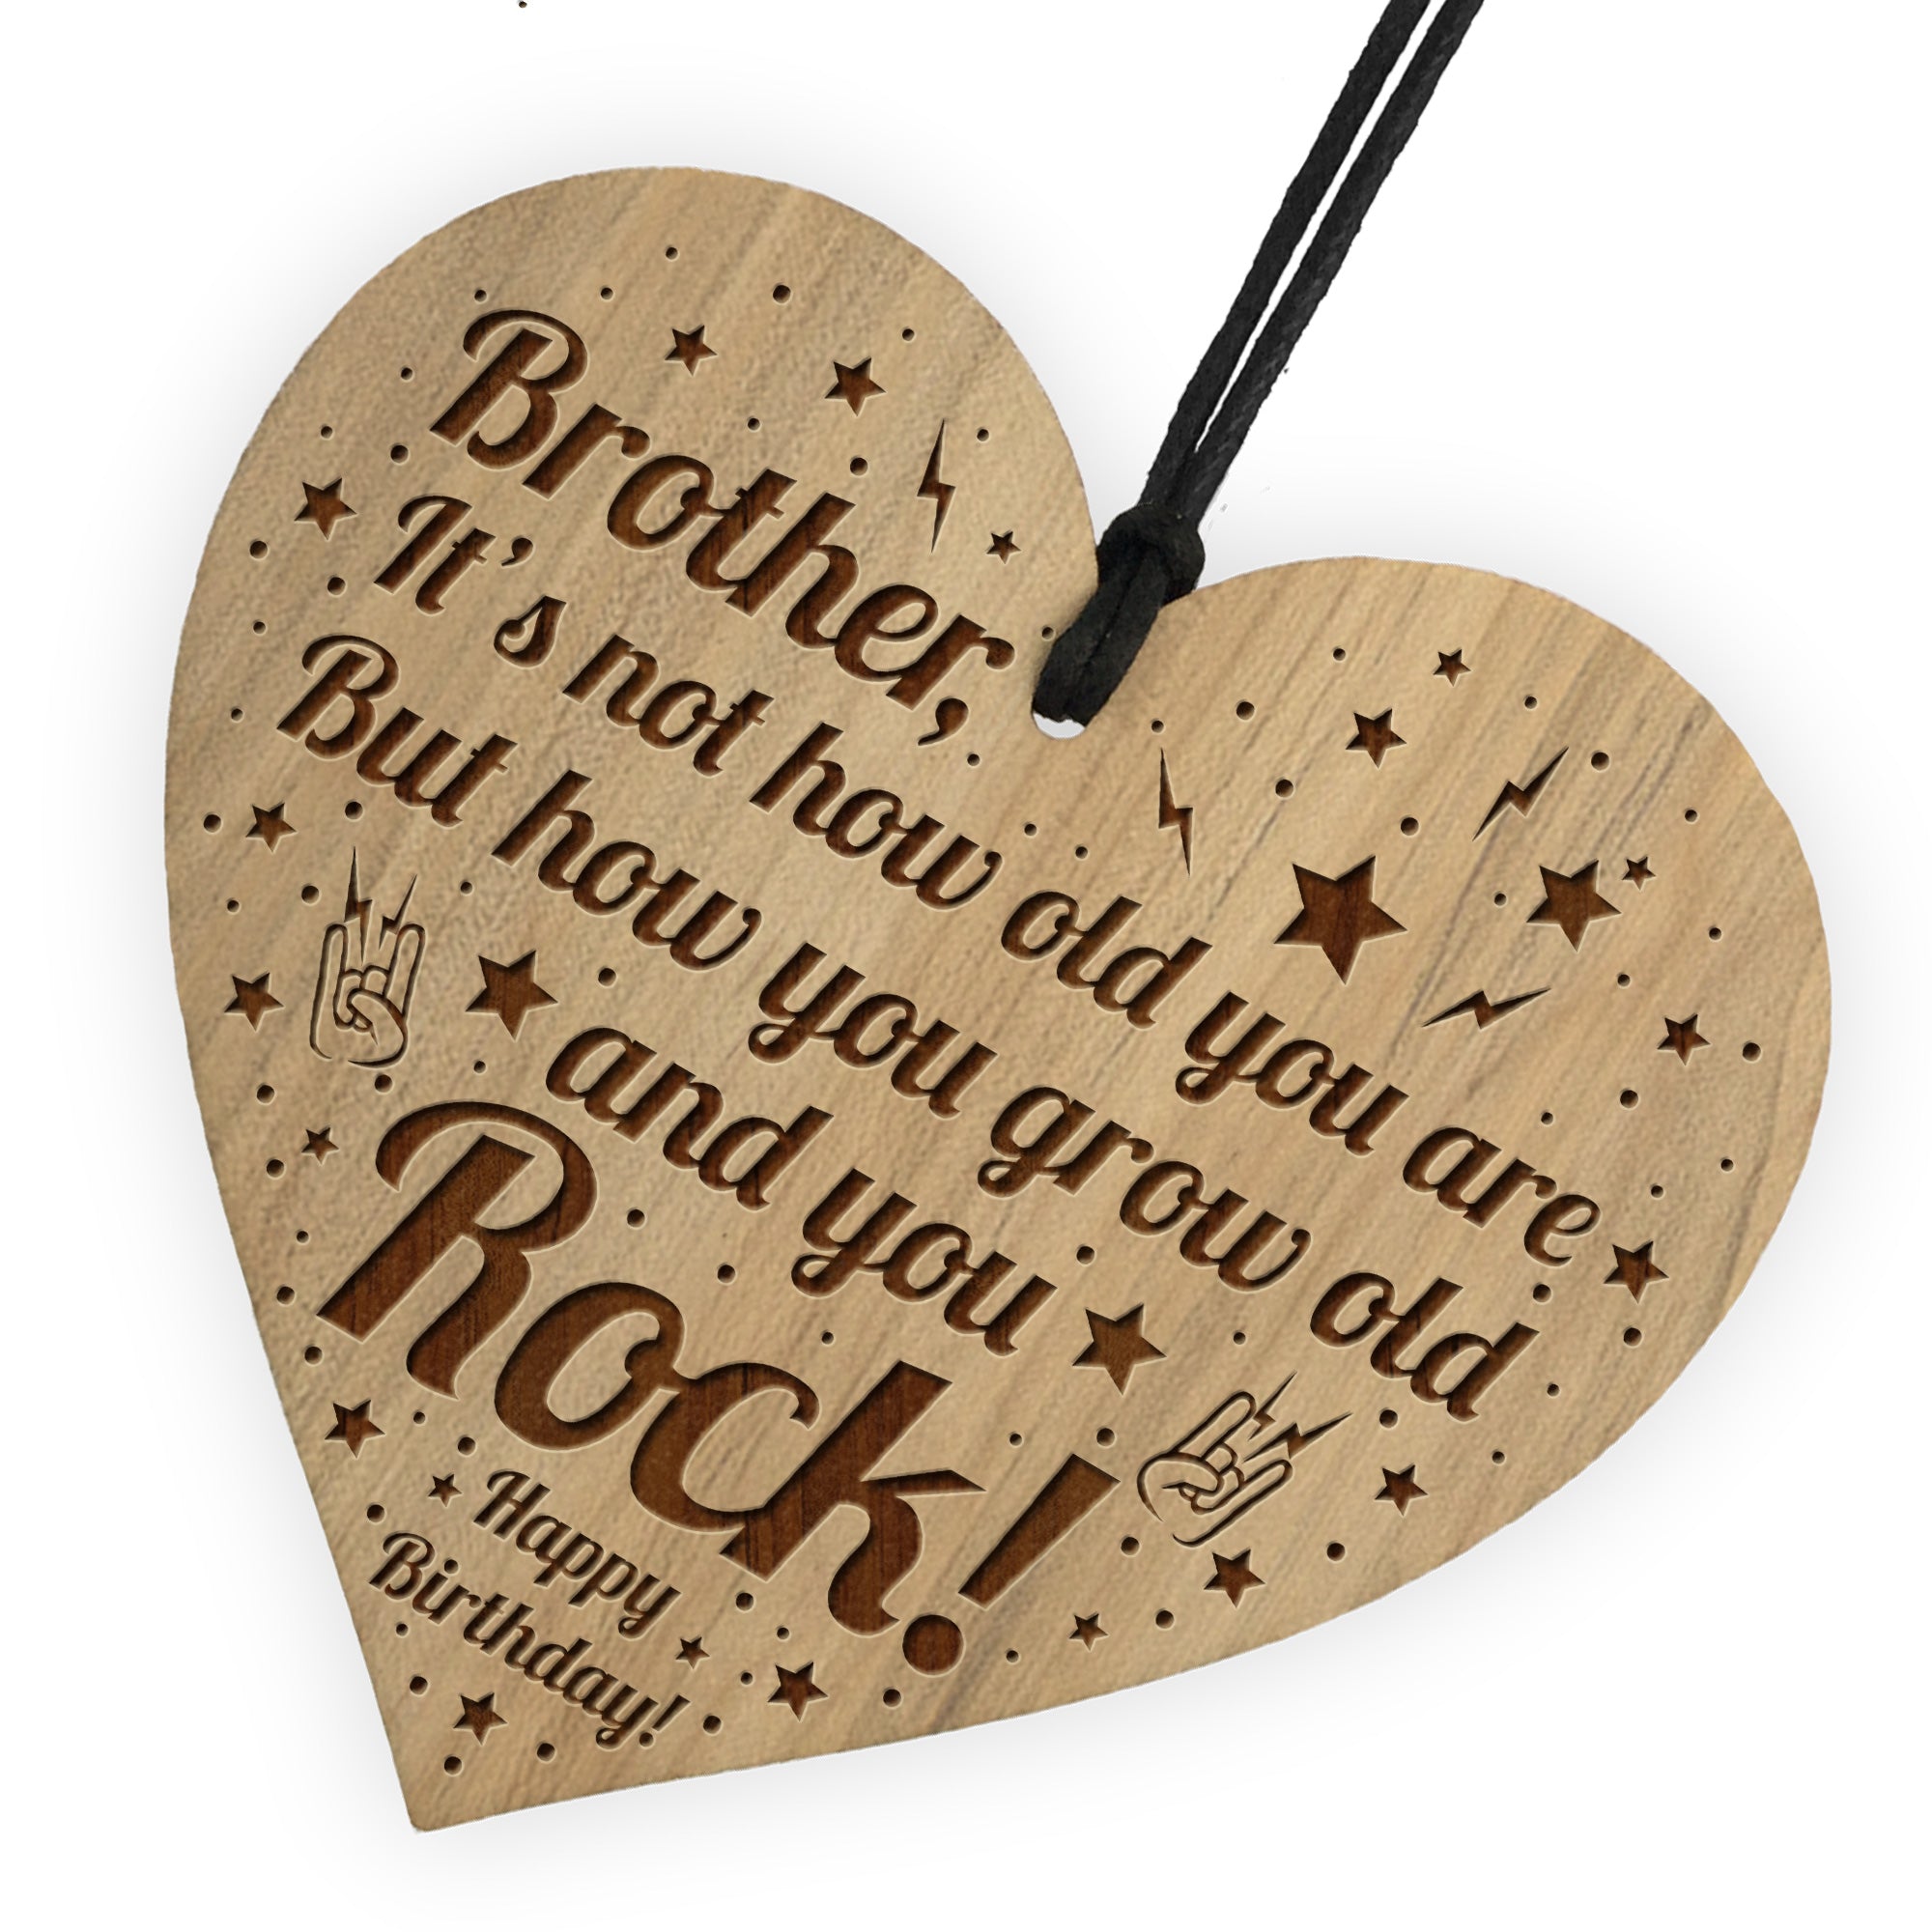 Best Brother Birthday Gift Personalised Engraved Heart Gift